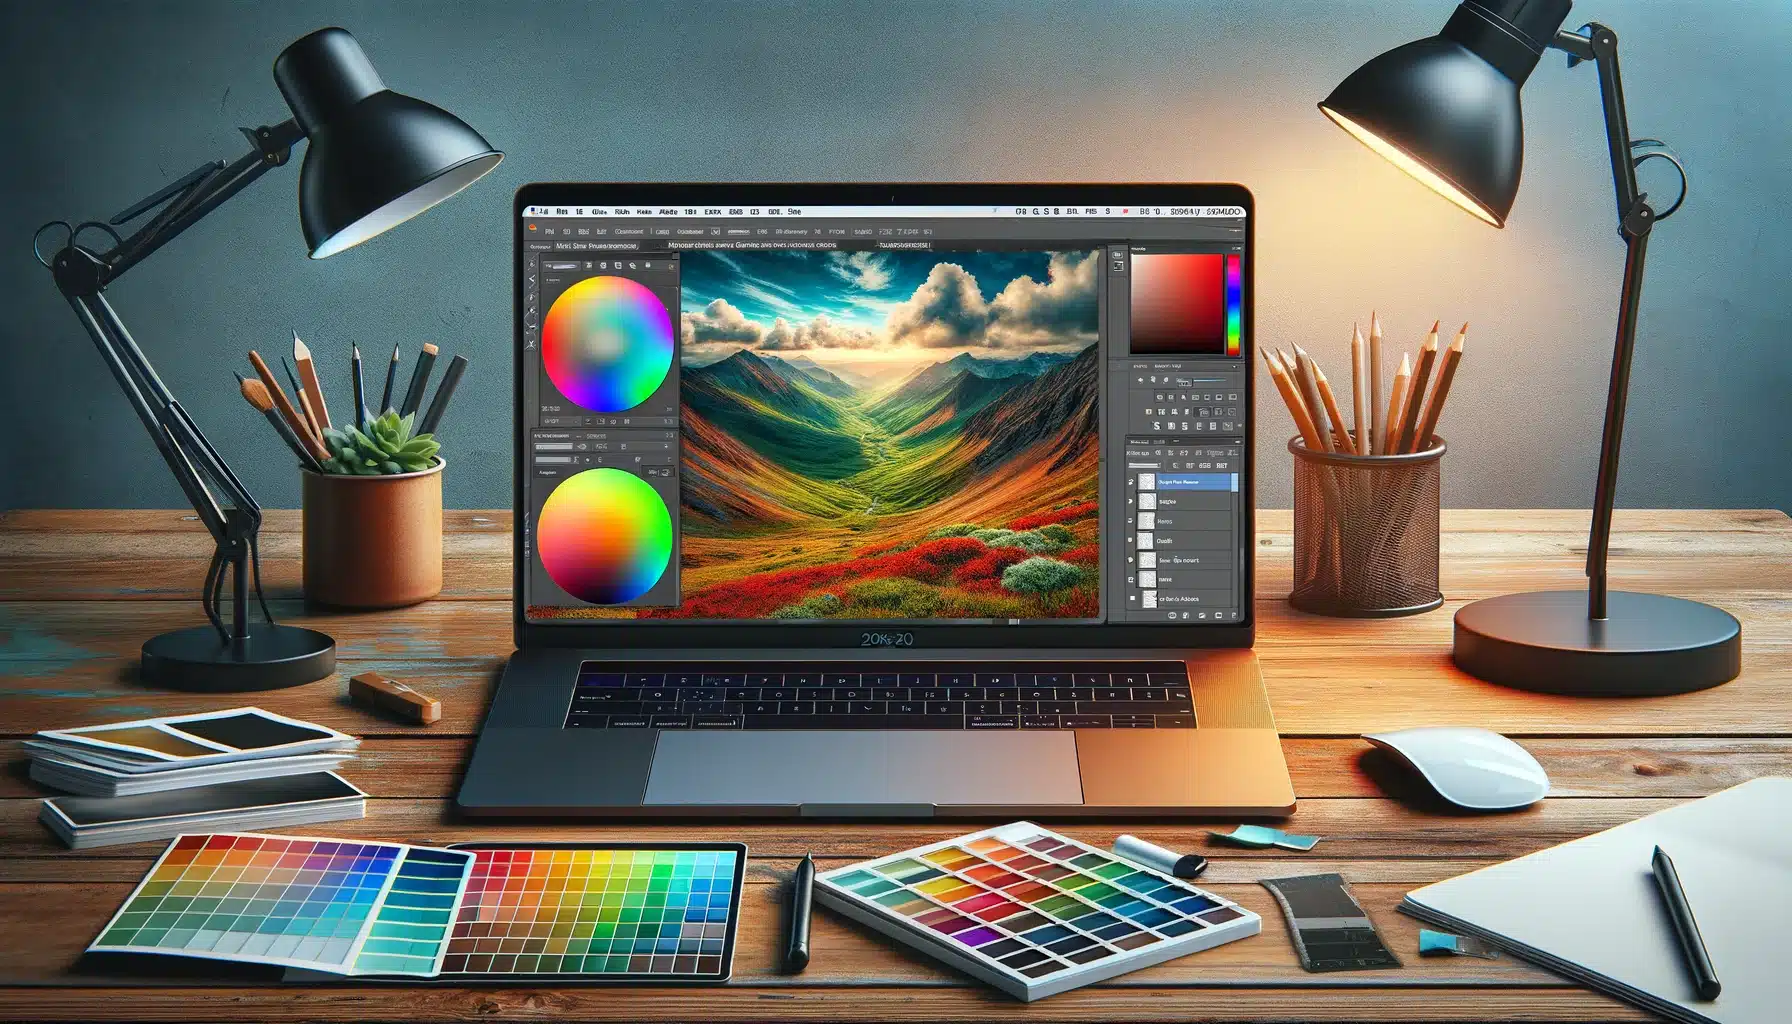 A laptop on a wooden desk displaying an oversaturated landscape image open in Adobe Photoshop, with the color editing bars visible. The workspace includes lamps, a pencil holder, color palettes, and a plant.